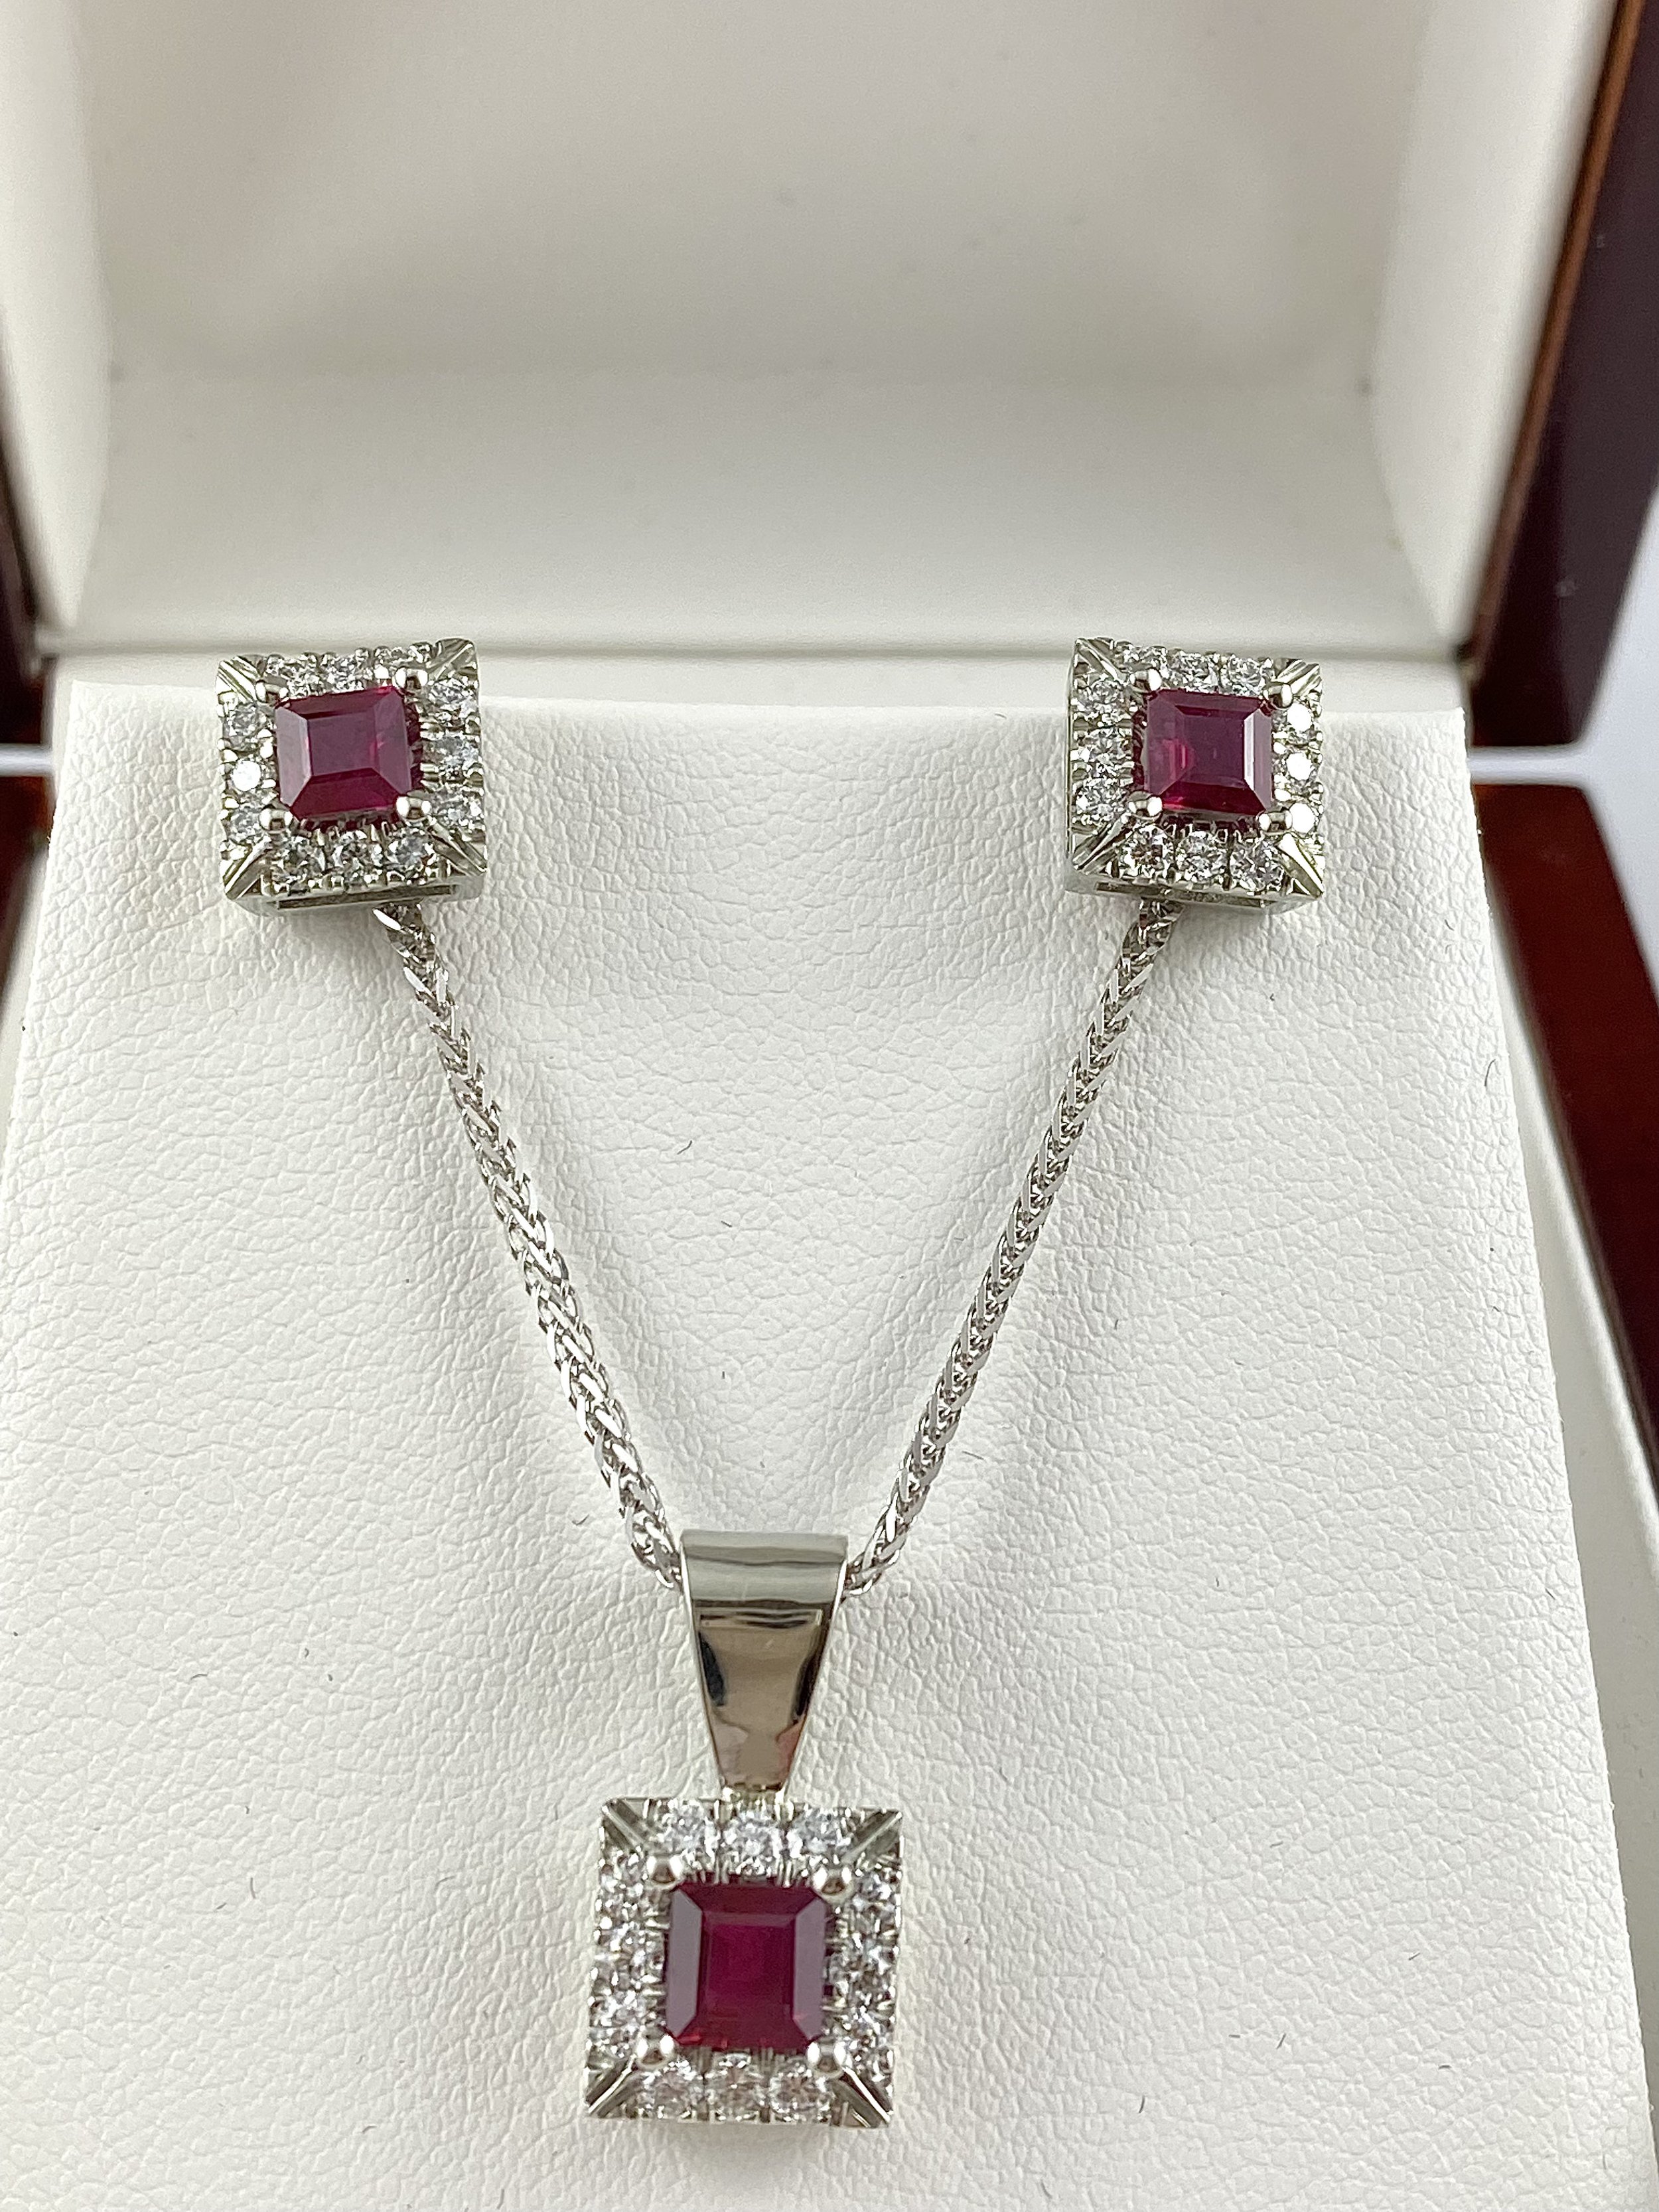 19K White Gold Diamond and Ruby Earring and Pendant Set